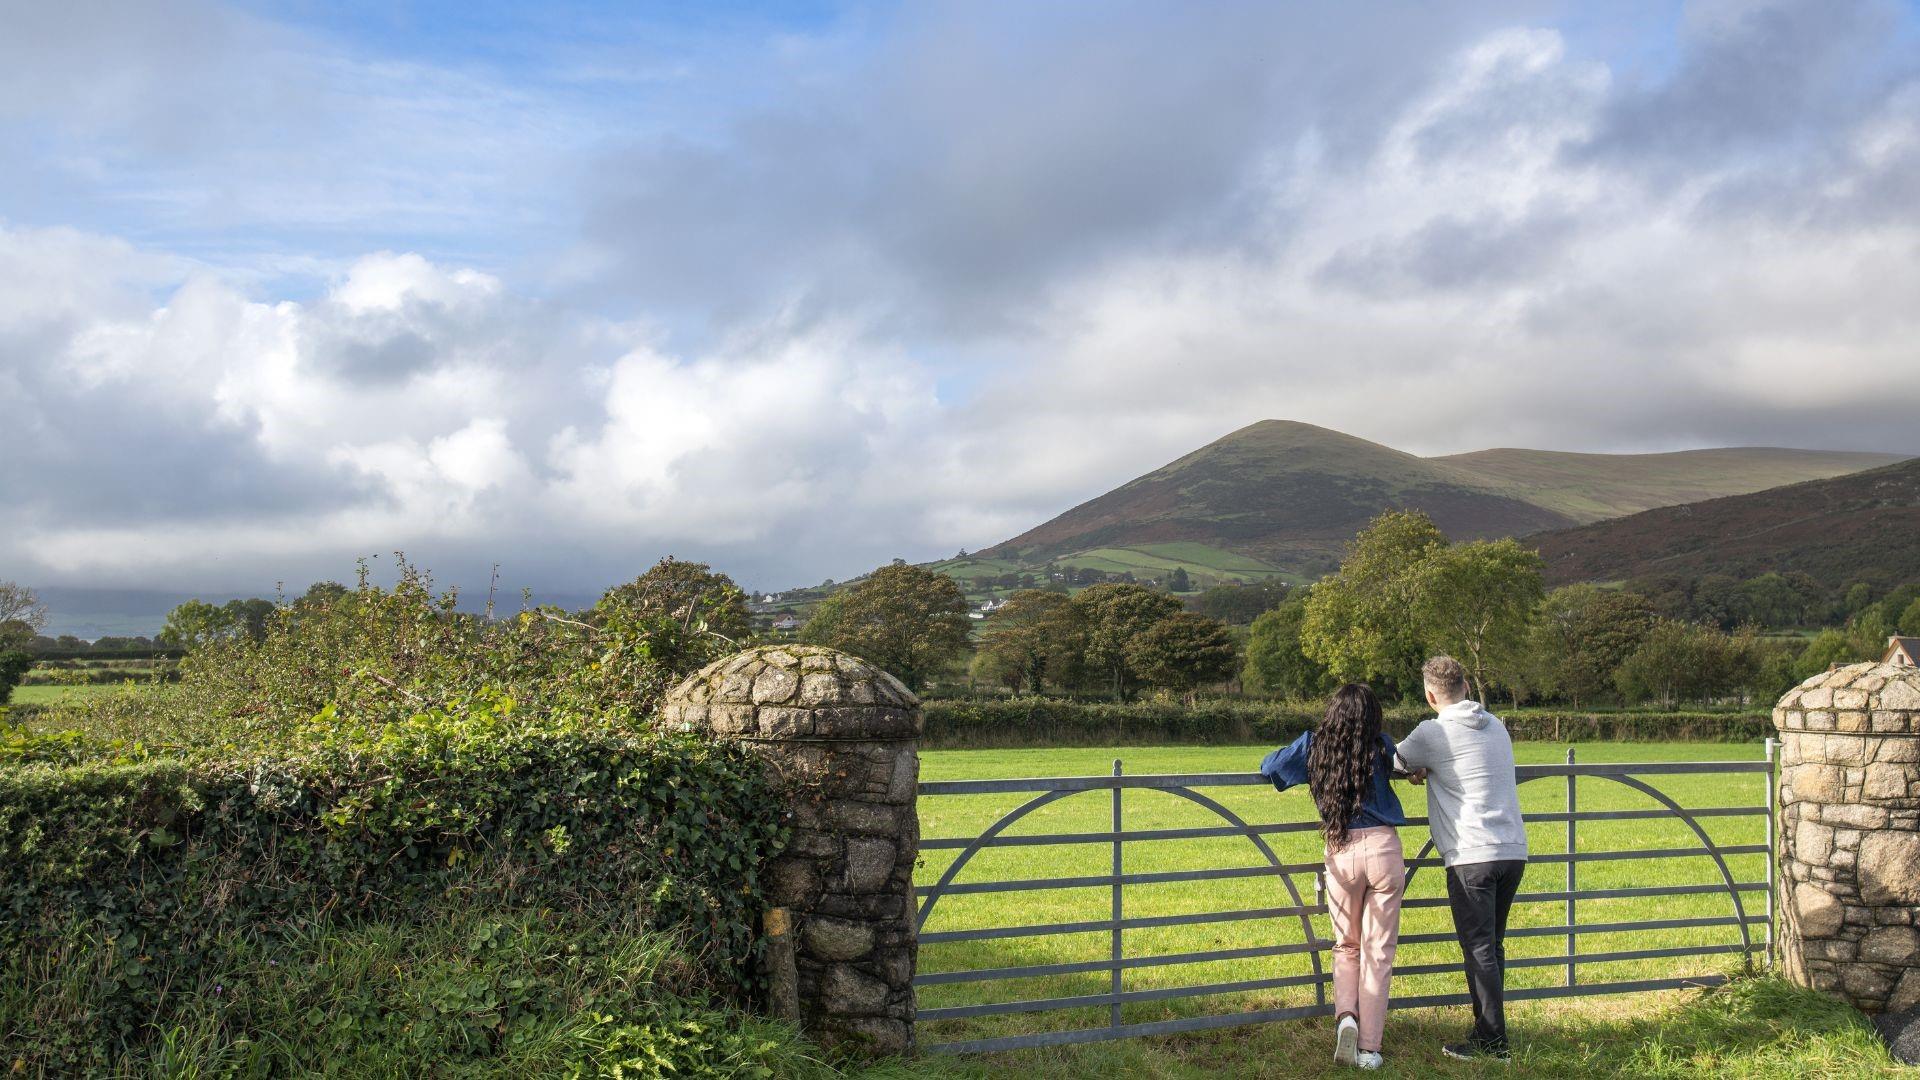 Couple standing at a gate admiring the lush green countryside and mountain in the distance